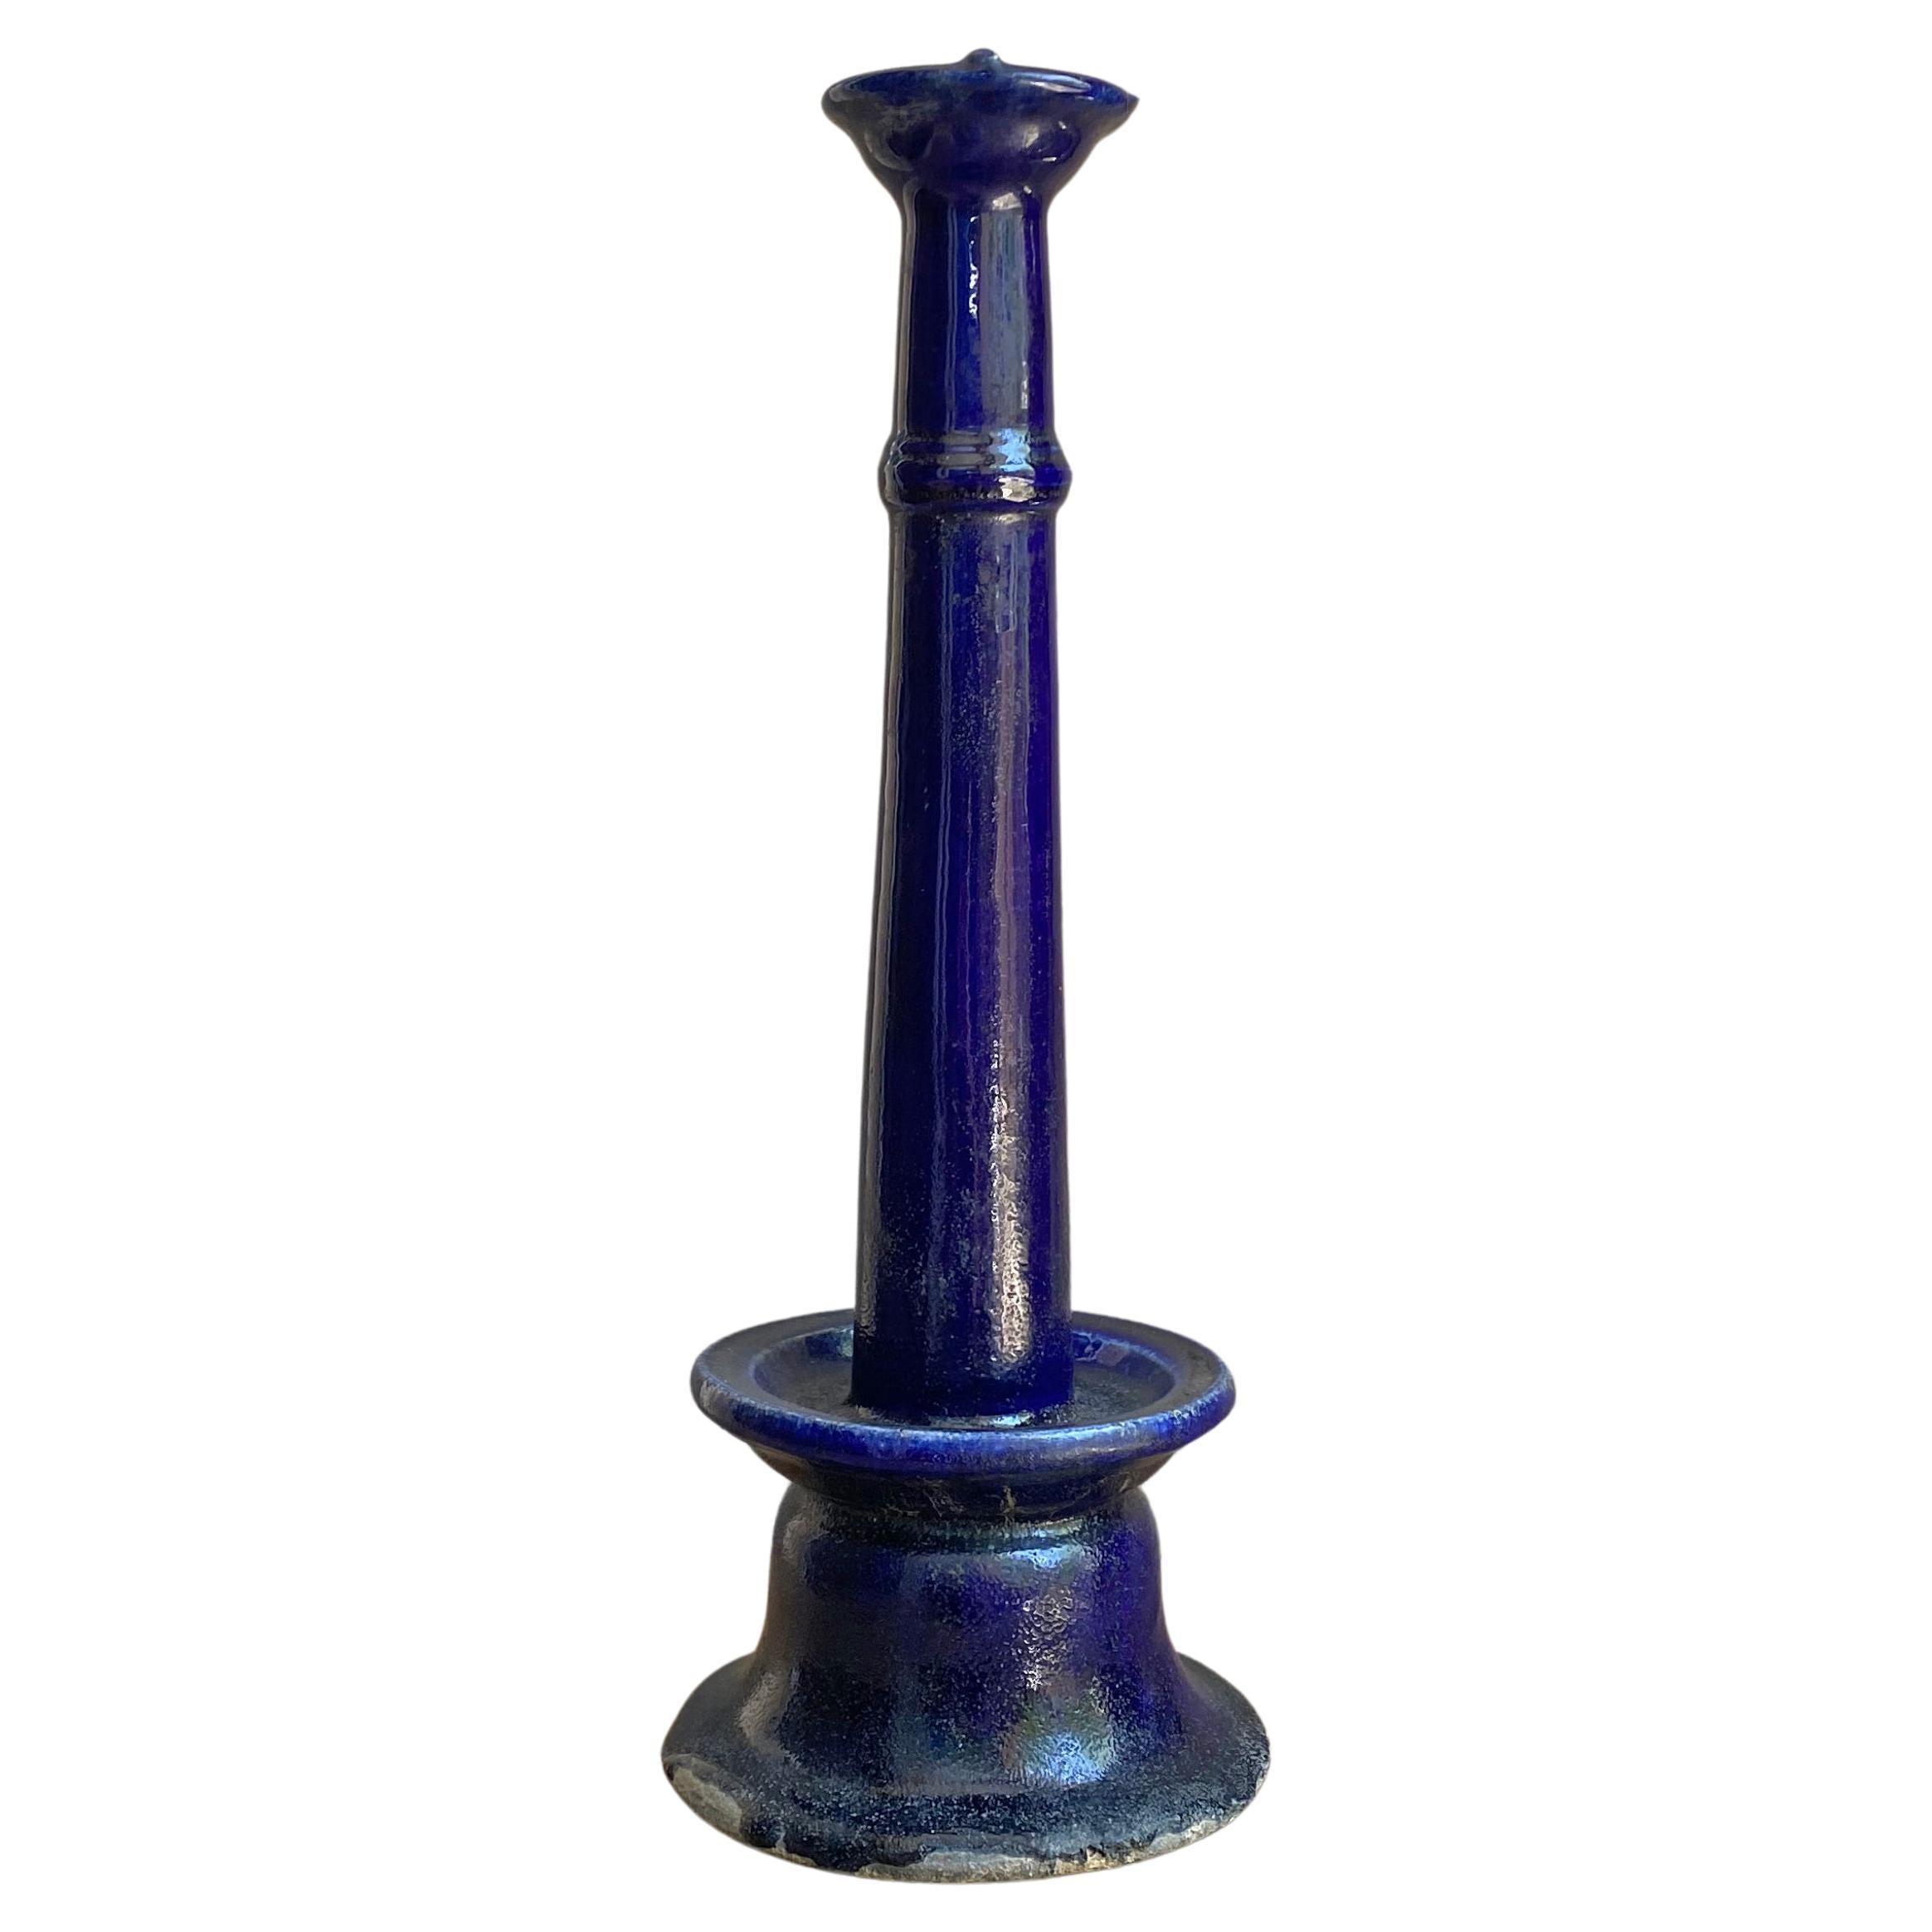 Early 20th Century Chinese Ceramic Oil Lamp with Blue Glaze